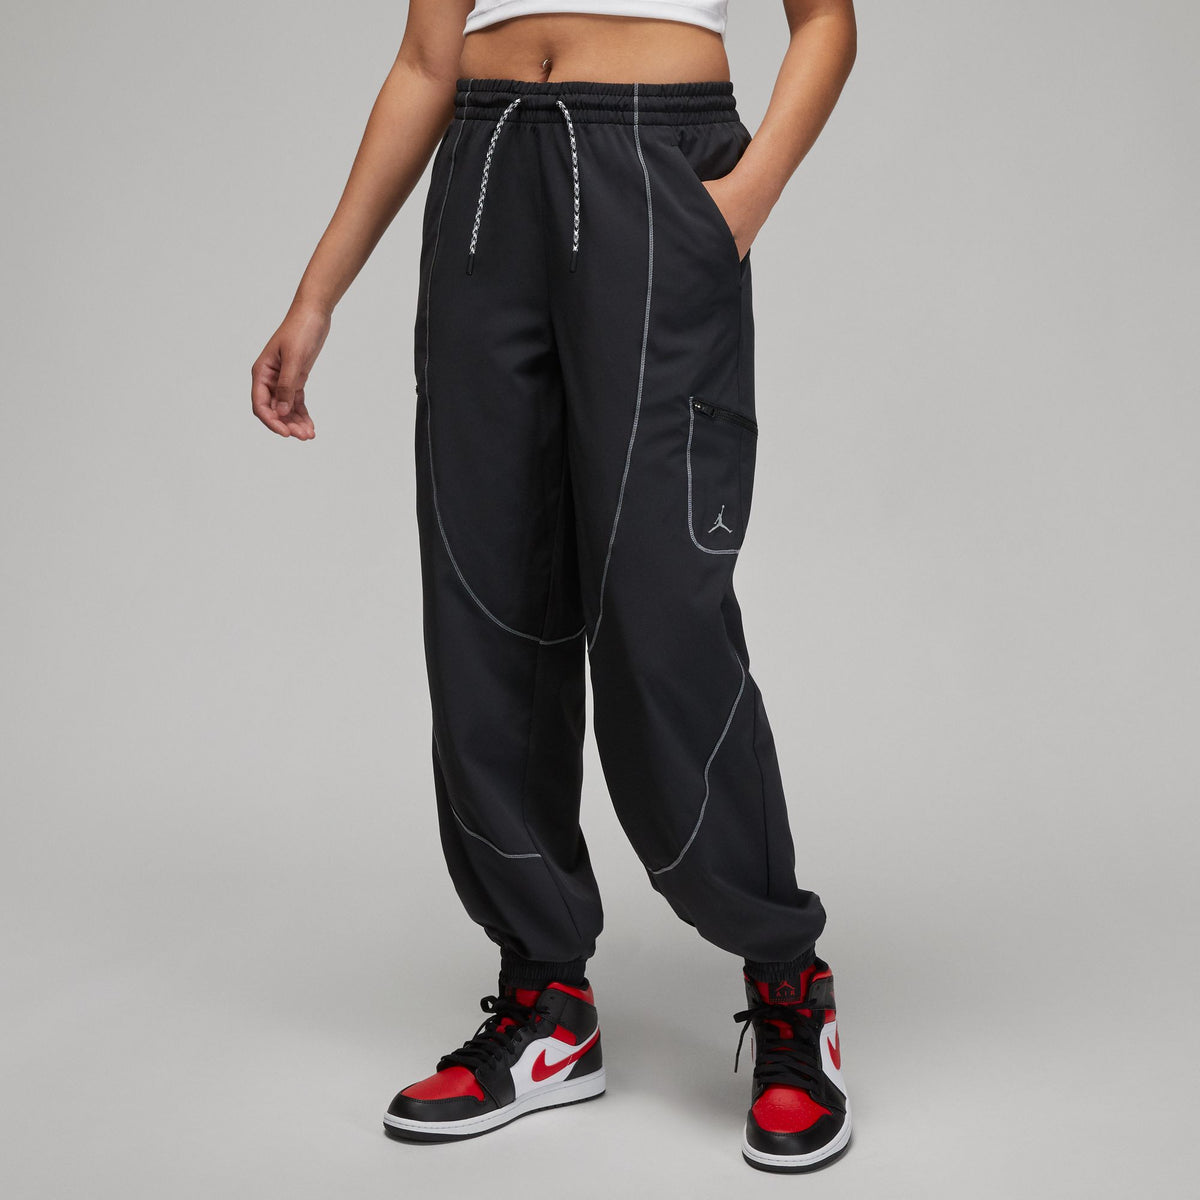 W SPORT TUNNEL PANT